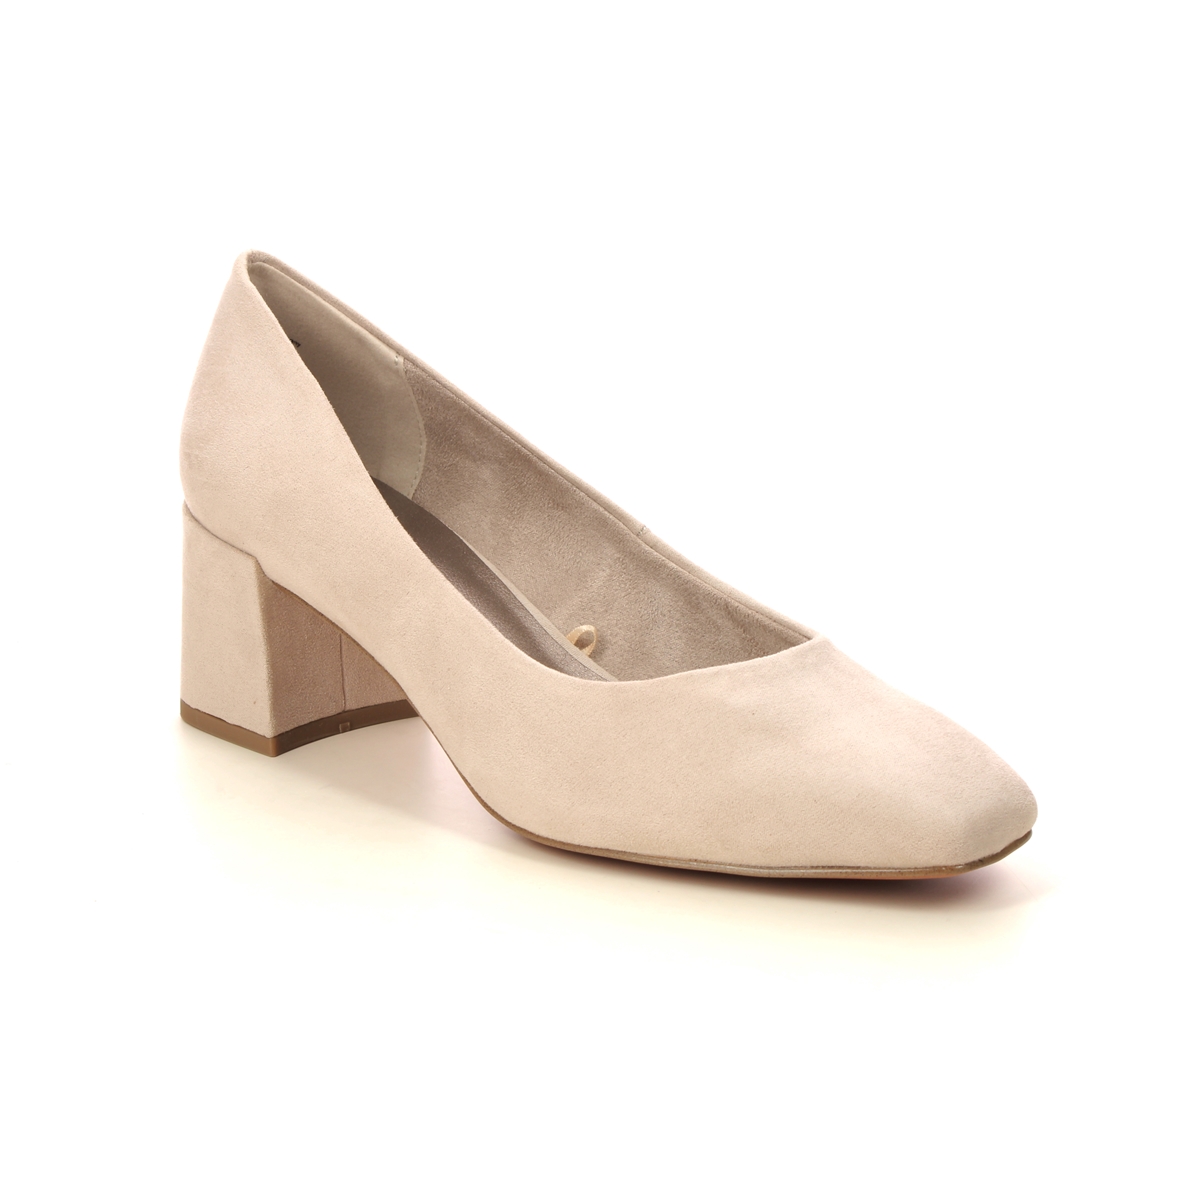 Marco Tozzi Bitto Beige Womens Court Shoes 22424-42-404 in a Plain Textile in Size 36